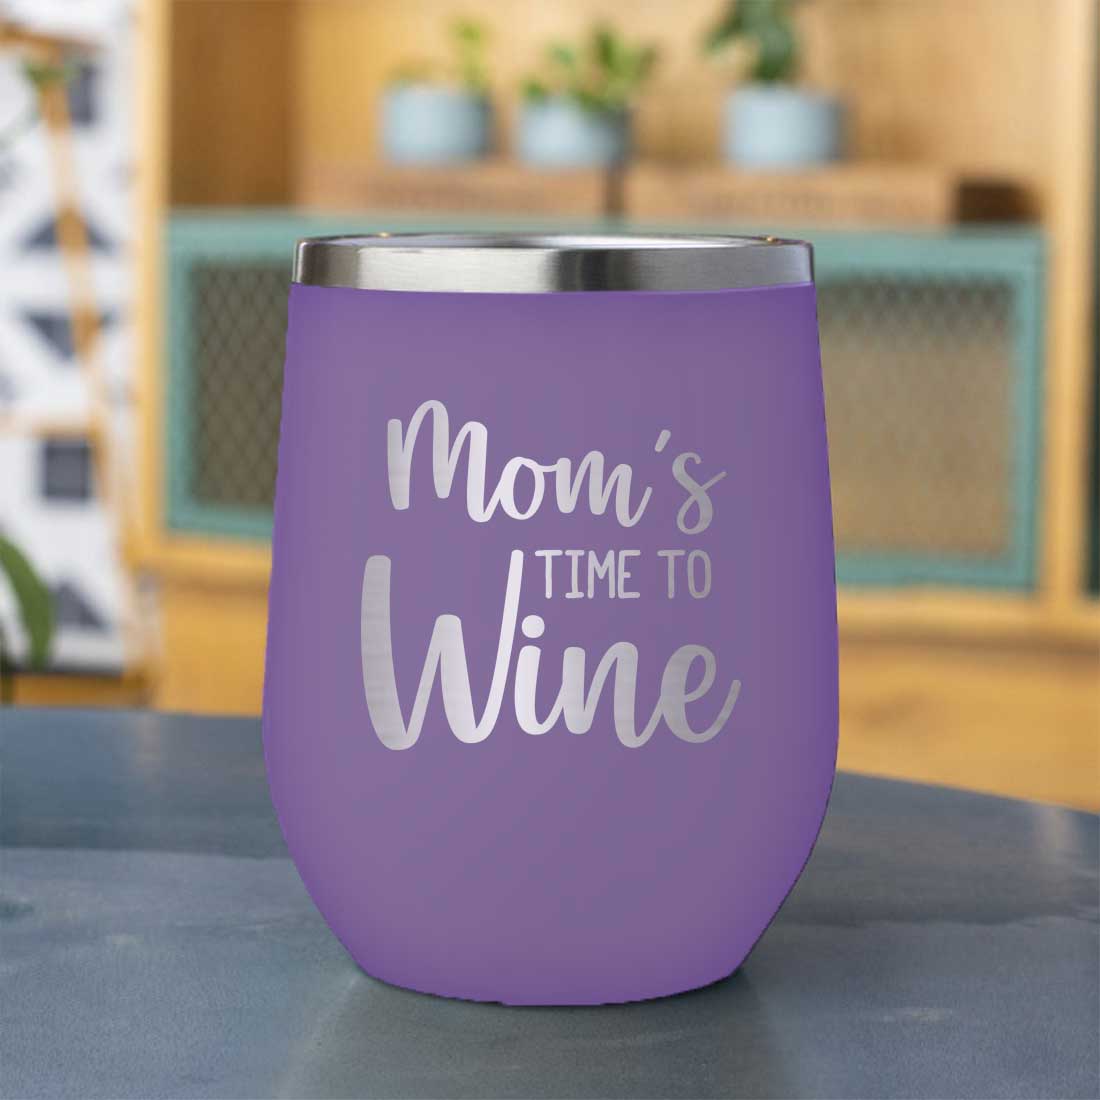 Designer Steel Travel Coffee Flask Mug With Lid Gift for Mothers Day Gifts - Mom's Time To Wine